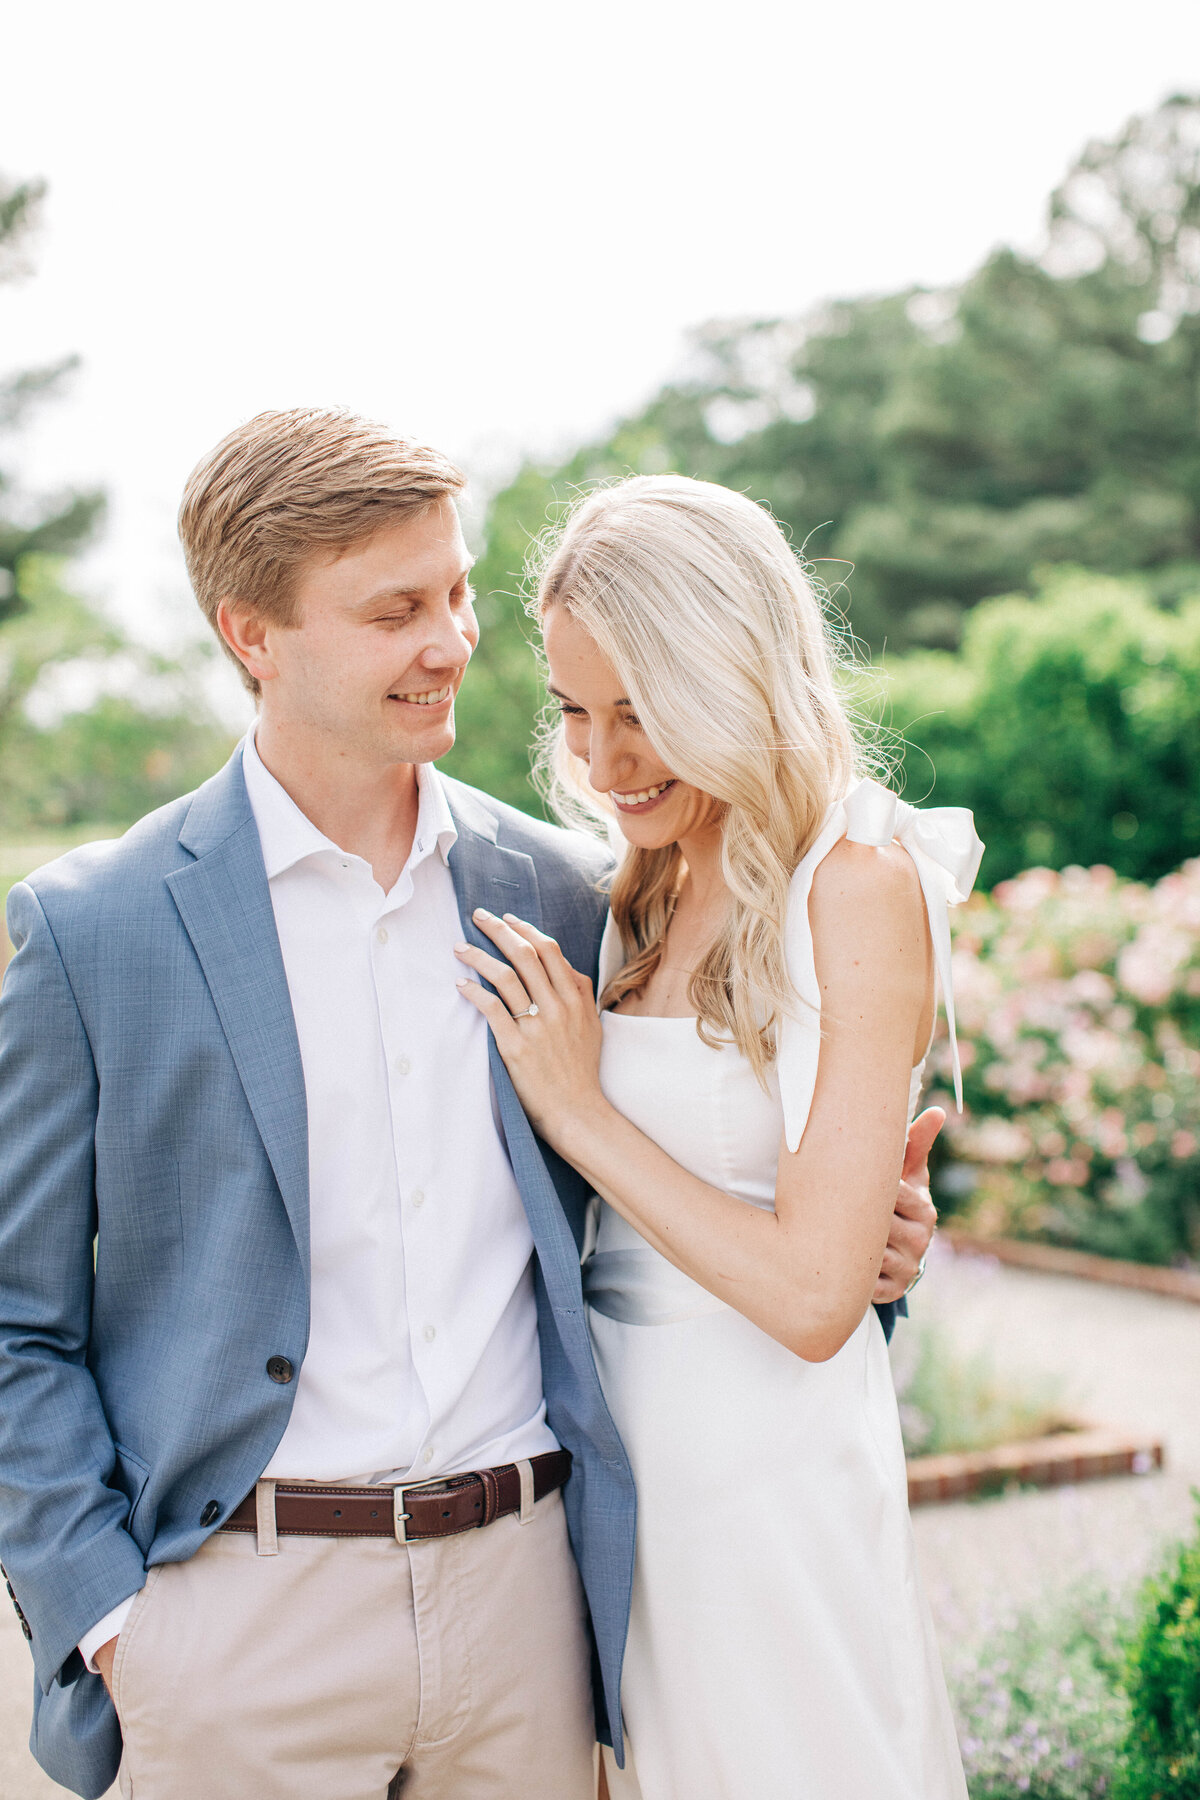 Engagement portrait of the bride and groom laughing in a rose garden in Memphis, Tennessee